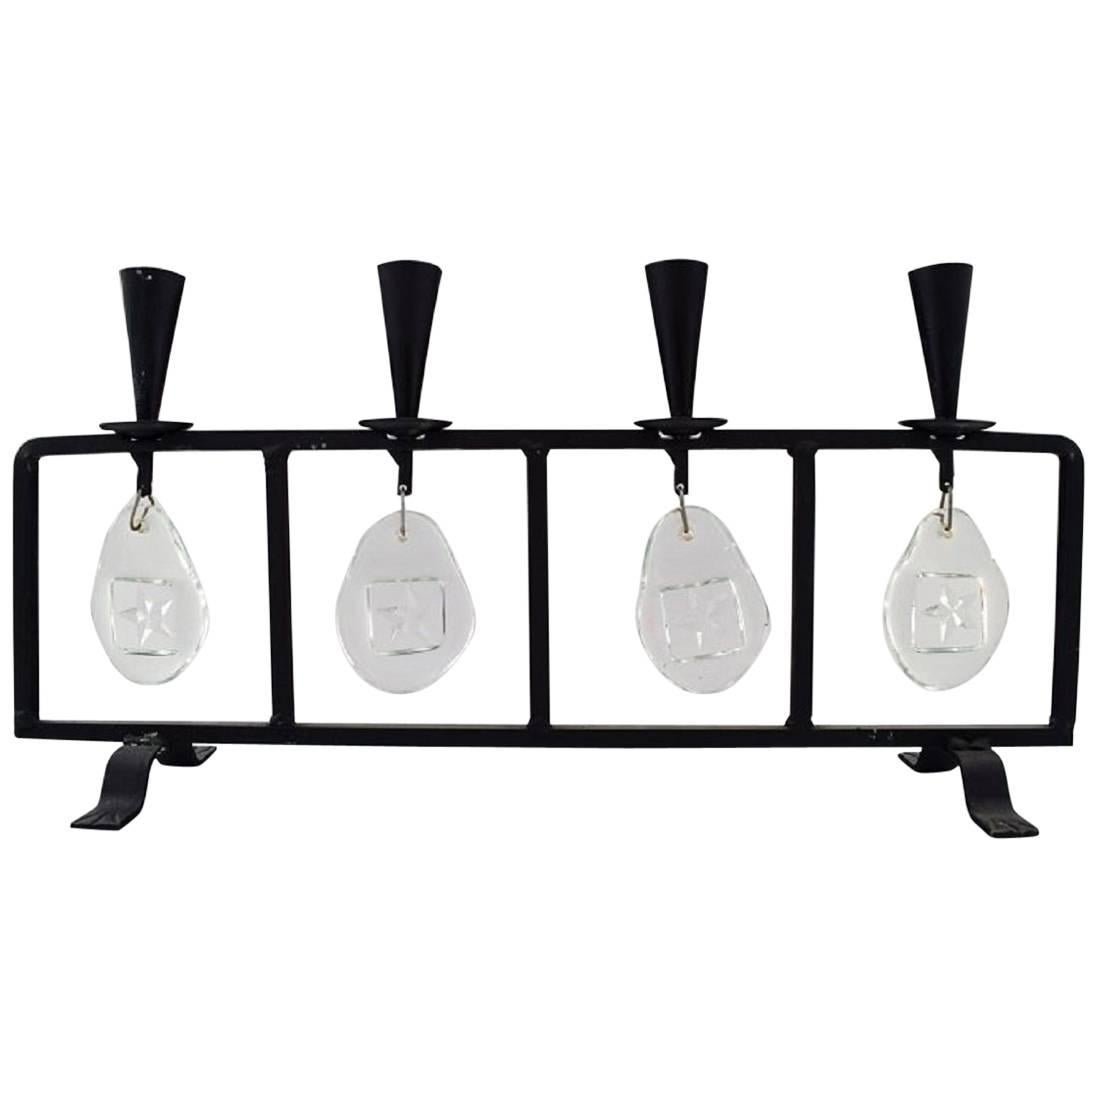 Erik Höglund for Kosta Boda, Candleholder in Cast Iron with Mouth Blown Glasses For Sale